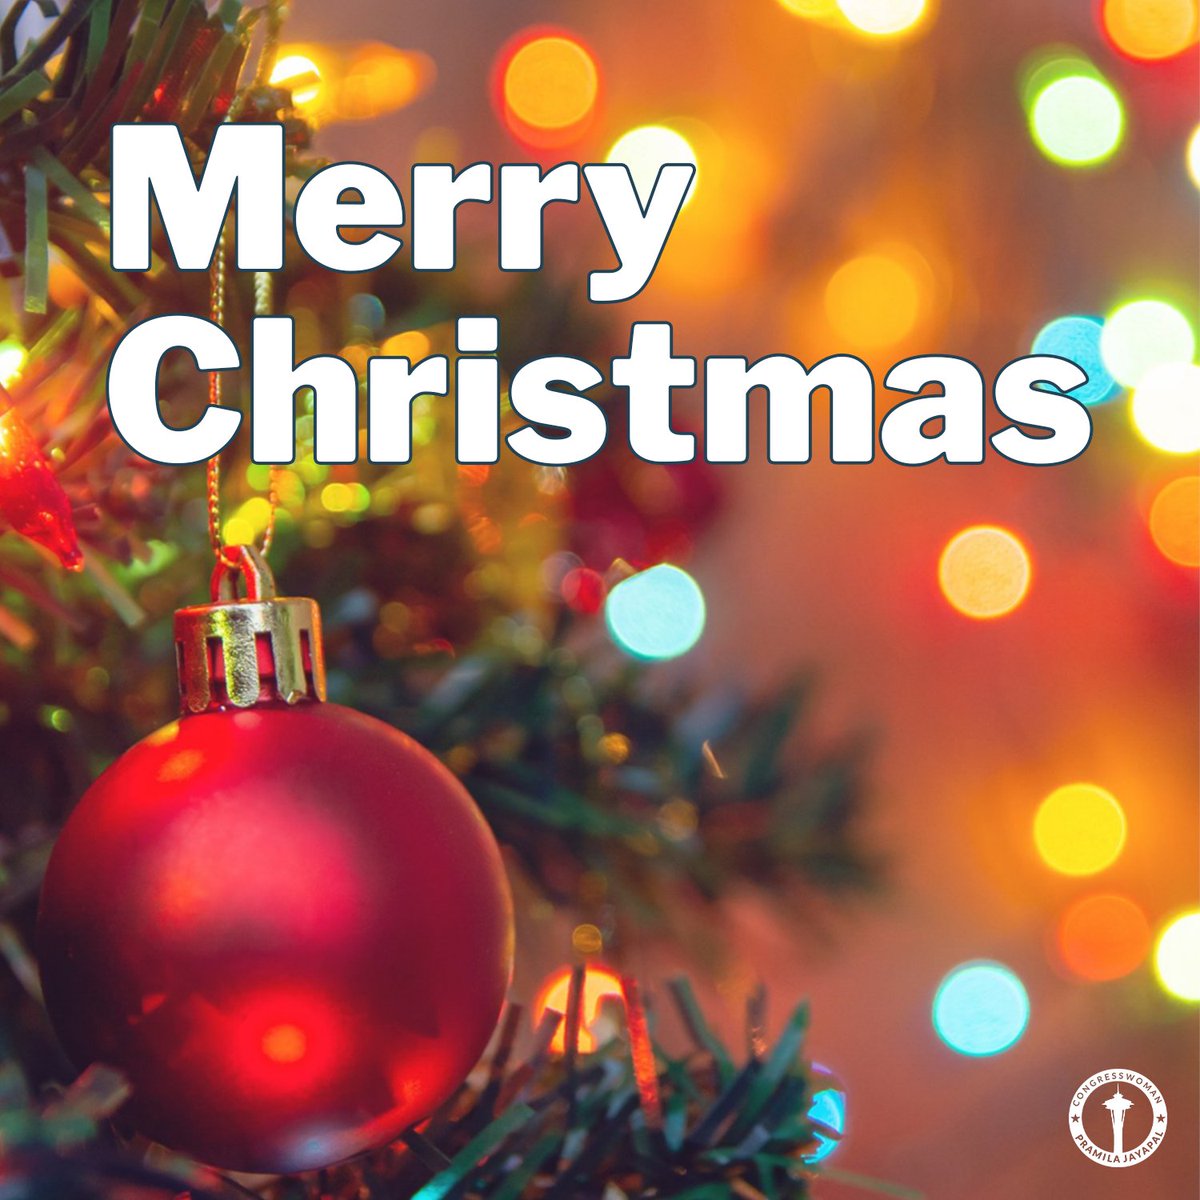 Merry Christmas! I wish all who celebrate a restful and joyous day spent with friends, family, and loved ones.